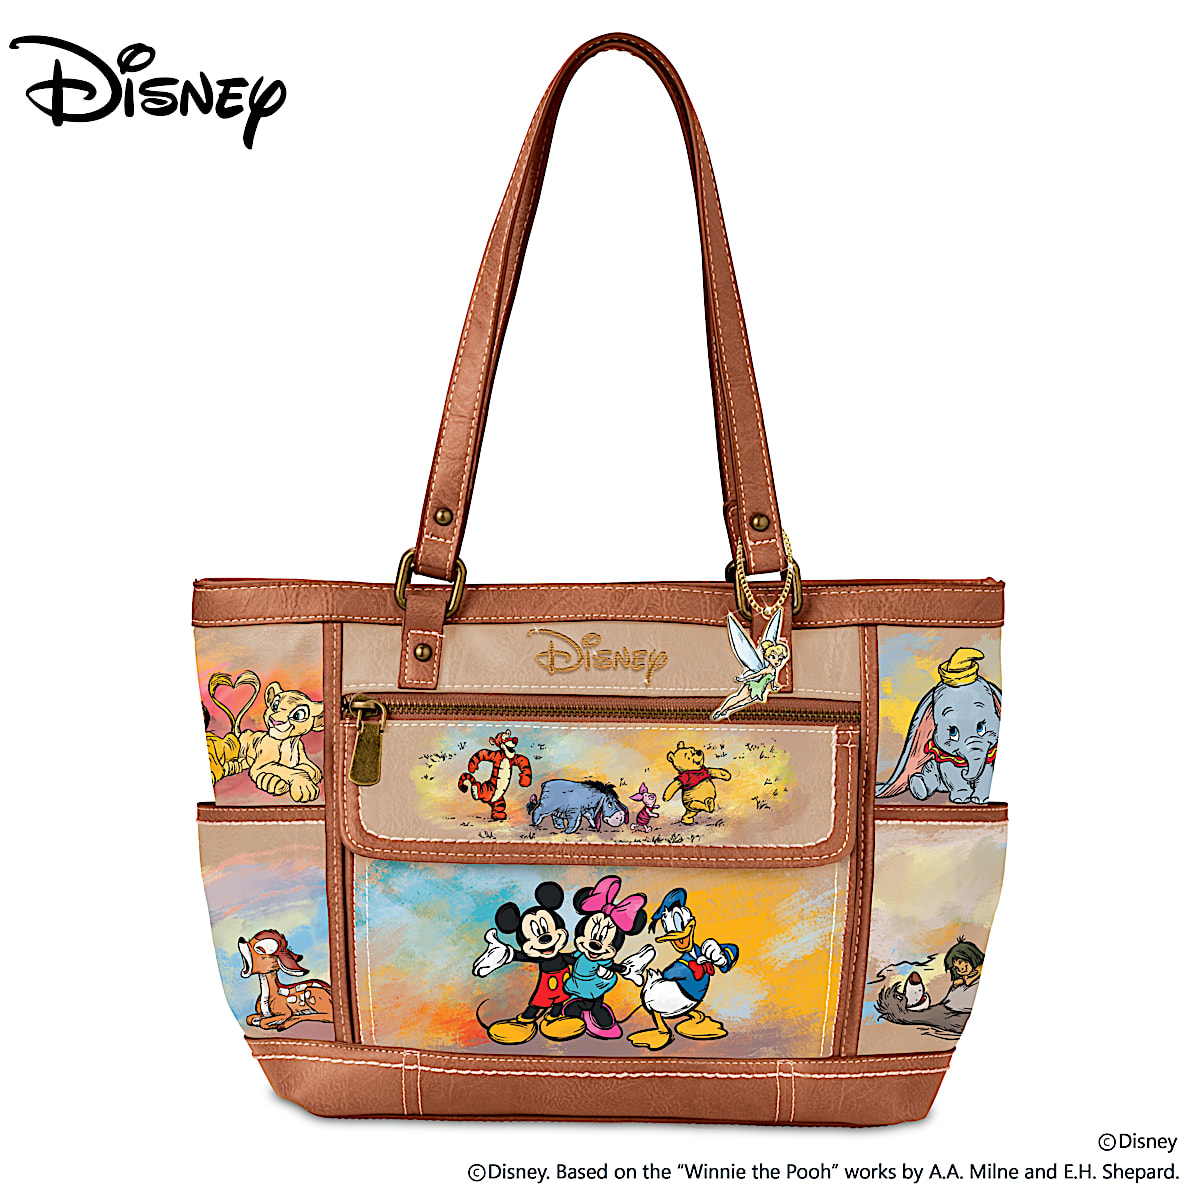 The Bradford Exchange - All your favorite Disney characters are here! Now  you can take them with you everywhere. #disney #purse #disneyfashion Click  to shop: https://bit.ly/3uXELE0 | Facebook